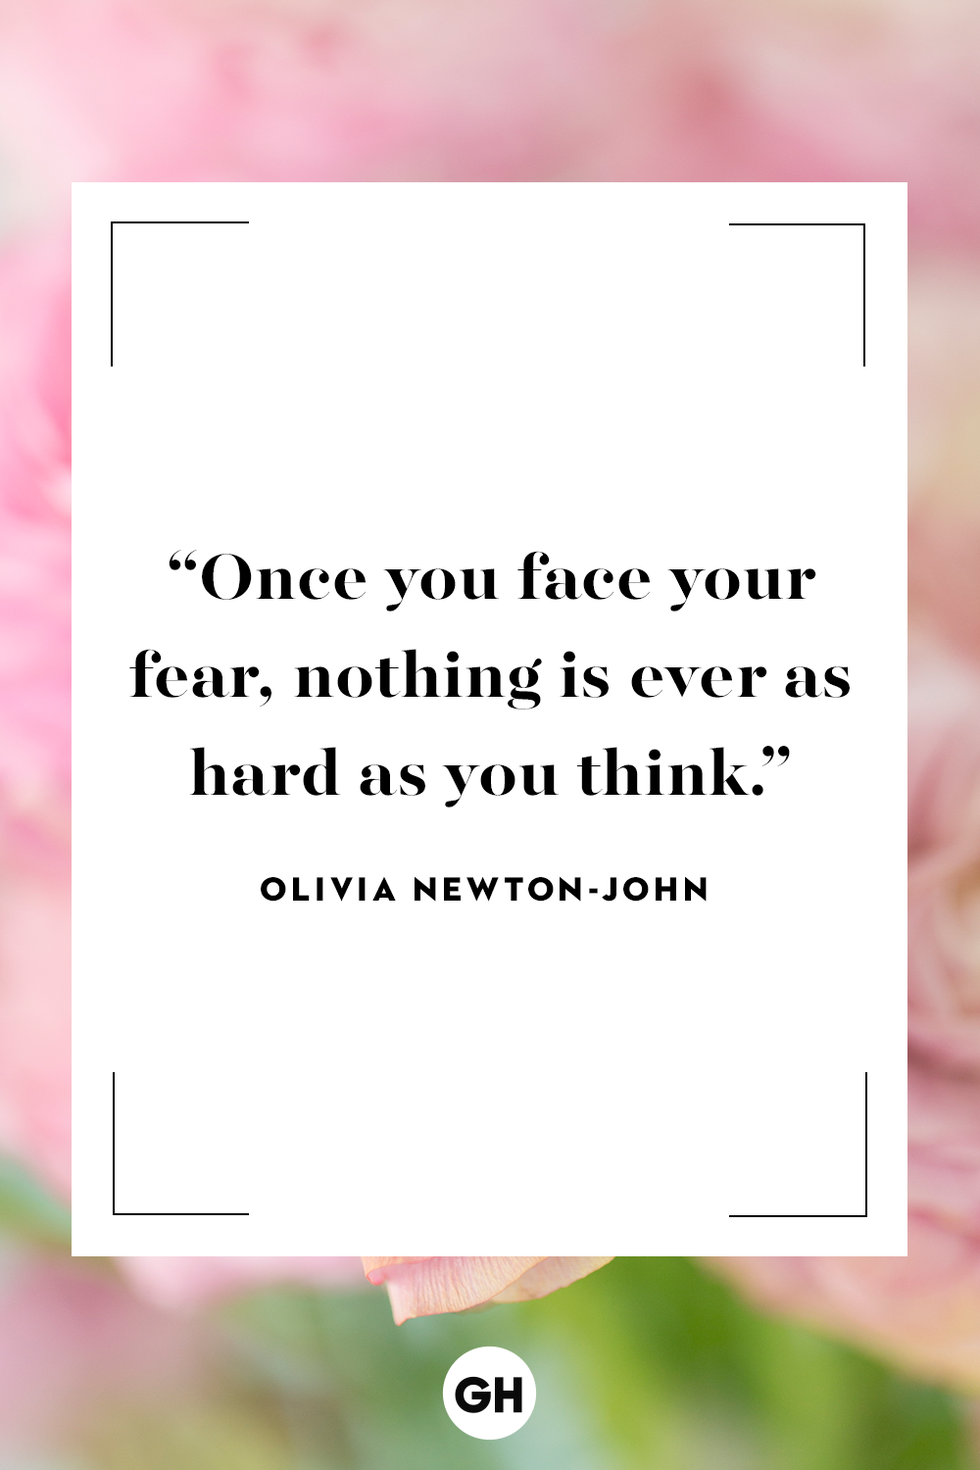 15 Brave Quotes to Inspire You to Be Yourself